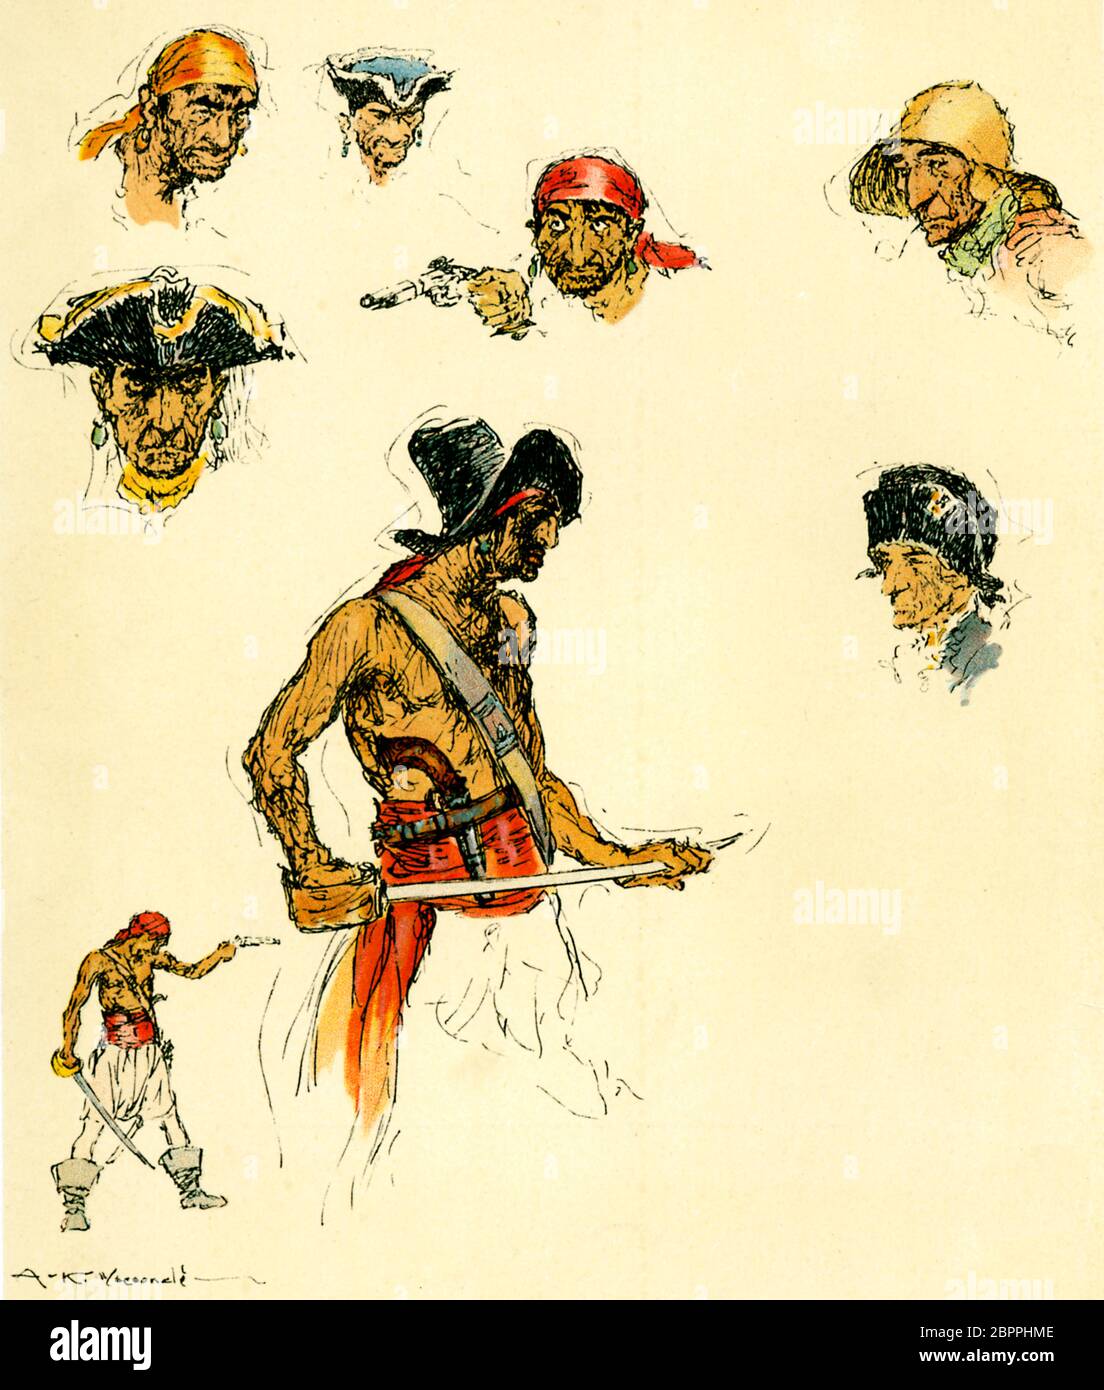 Pirate Sketches, portraits and figures of typical mean-looking buccaneers from the early days of piracy on the Spanish Main, cutlasses and flintlocks ready for action Stock Photo